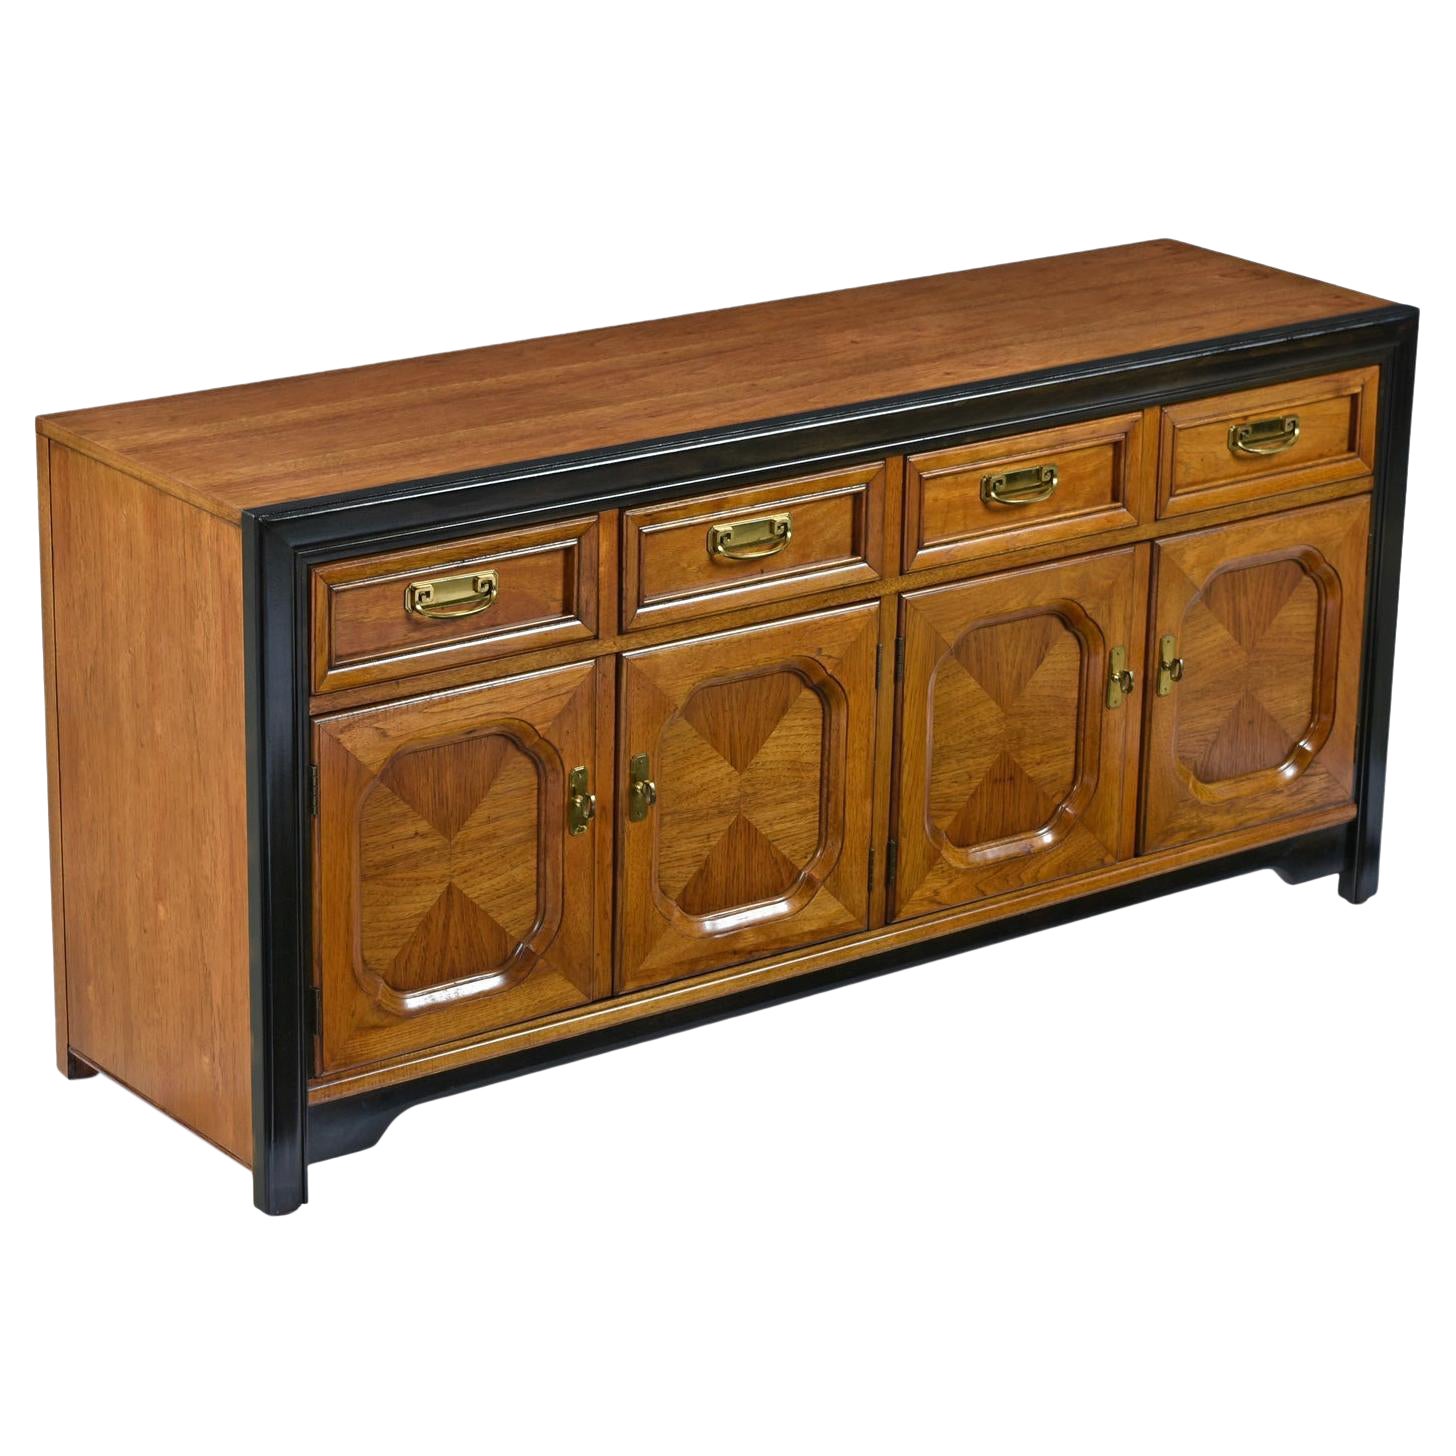 Dorothy Draper style campaign credenza made by esteemed US furniture maker Thomasville circa 1970s. Old growth flaxen flared grain fruitwood (most likely pecan) from top to bottom are the hallmarks of the Embassy line. Black lacquer accents and